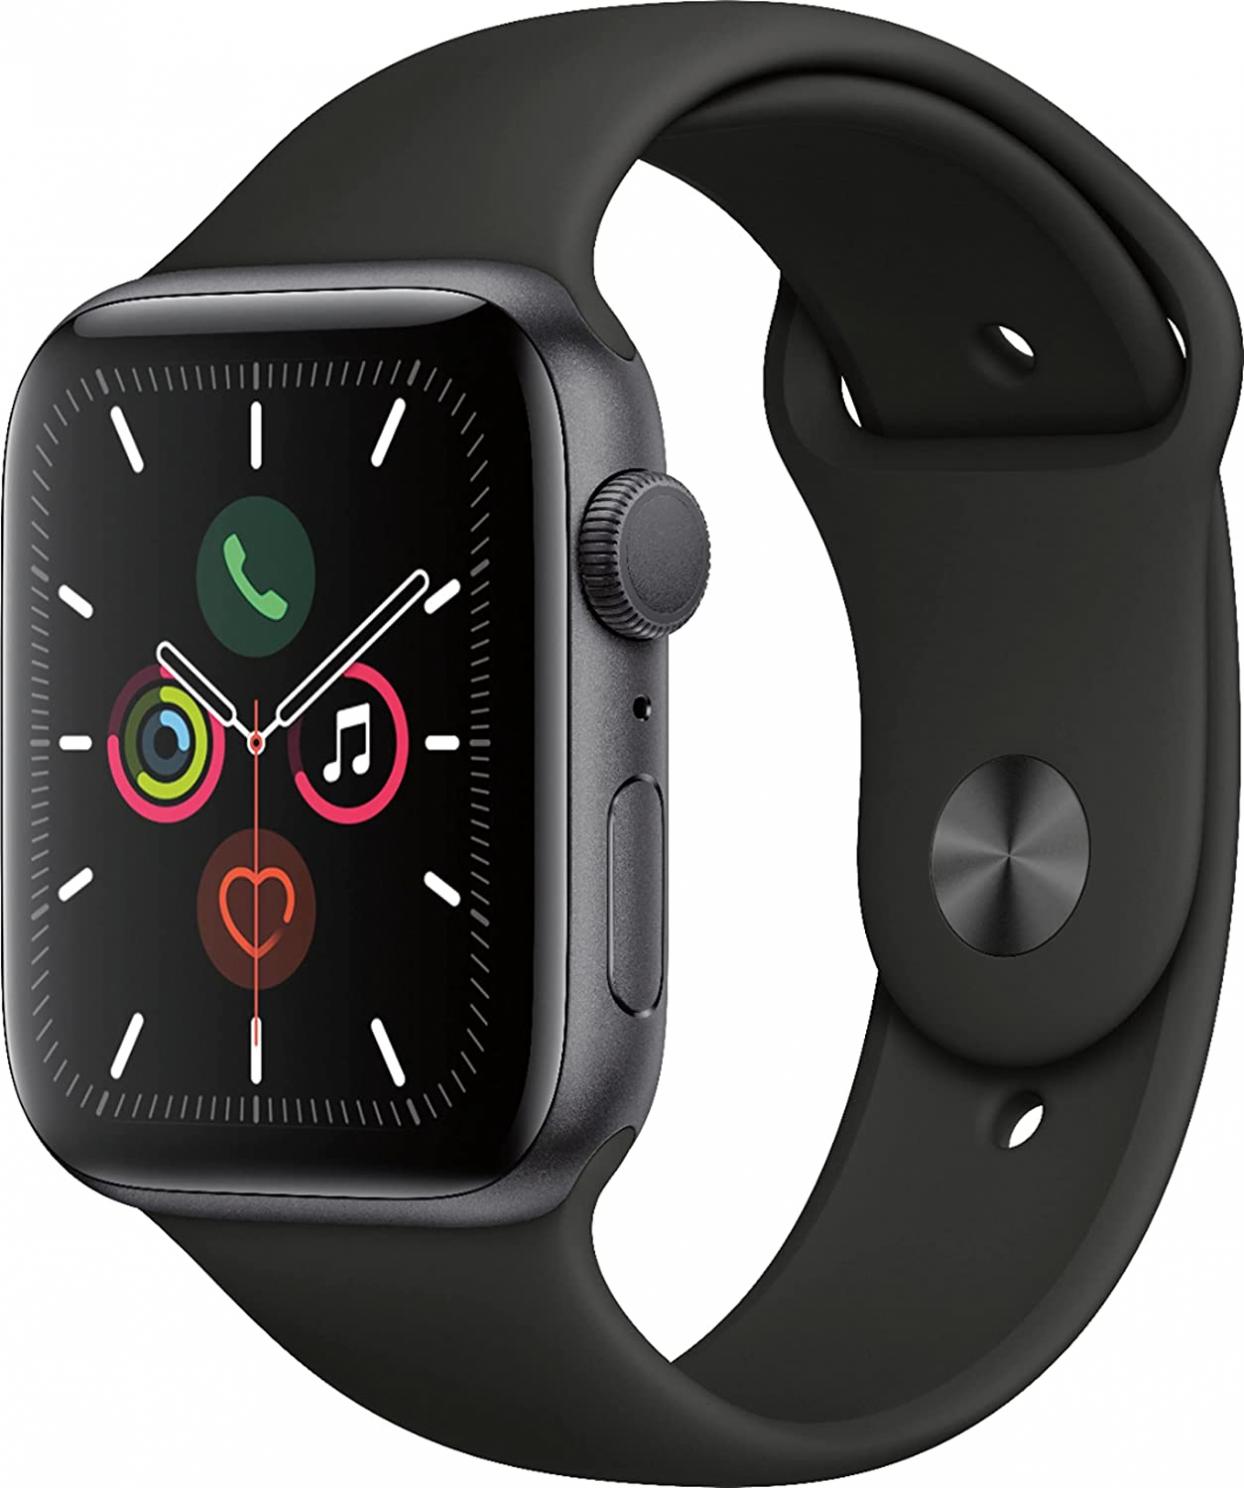 Apple Watch Series 5 (GPS, 44MM) - Space Gray Aluminum Case with Black Sport Band (Renewed Premium)